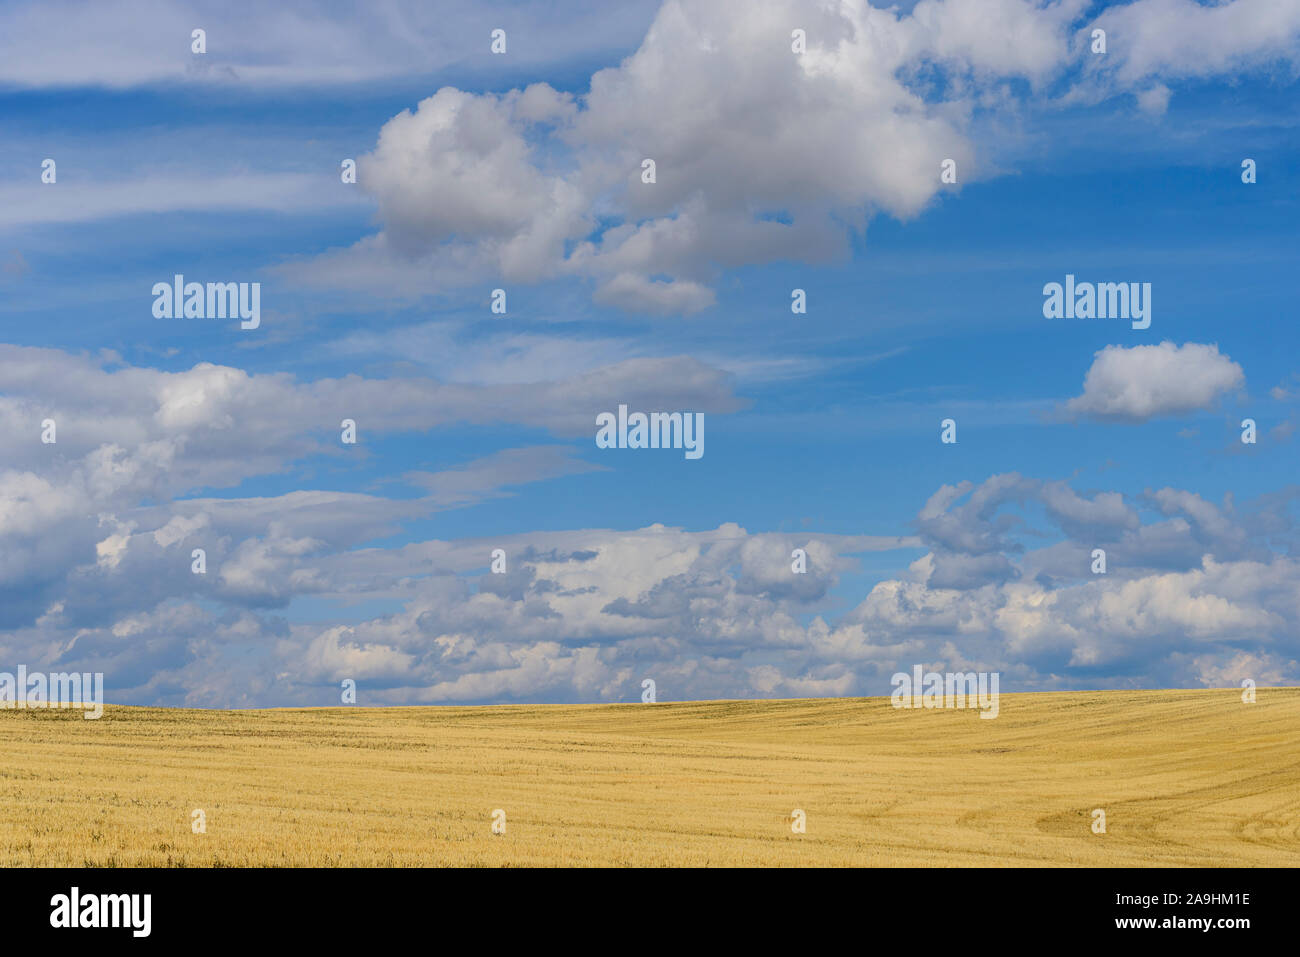 Looking out over golden fields of grain under bright blue skies with white fluffy clouds. Stock Photo